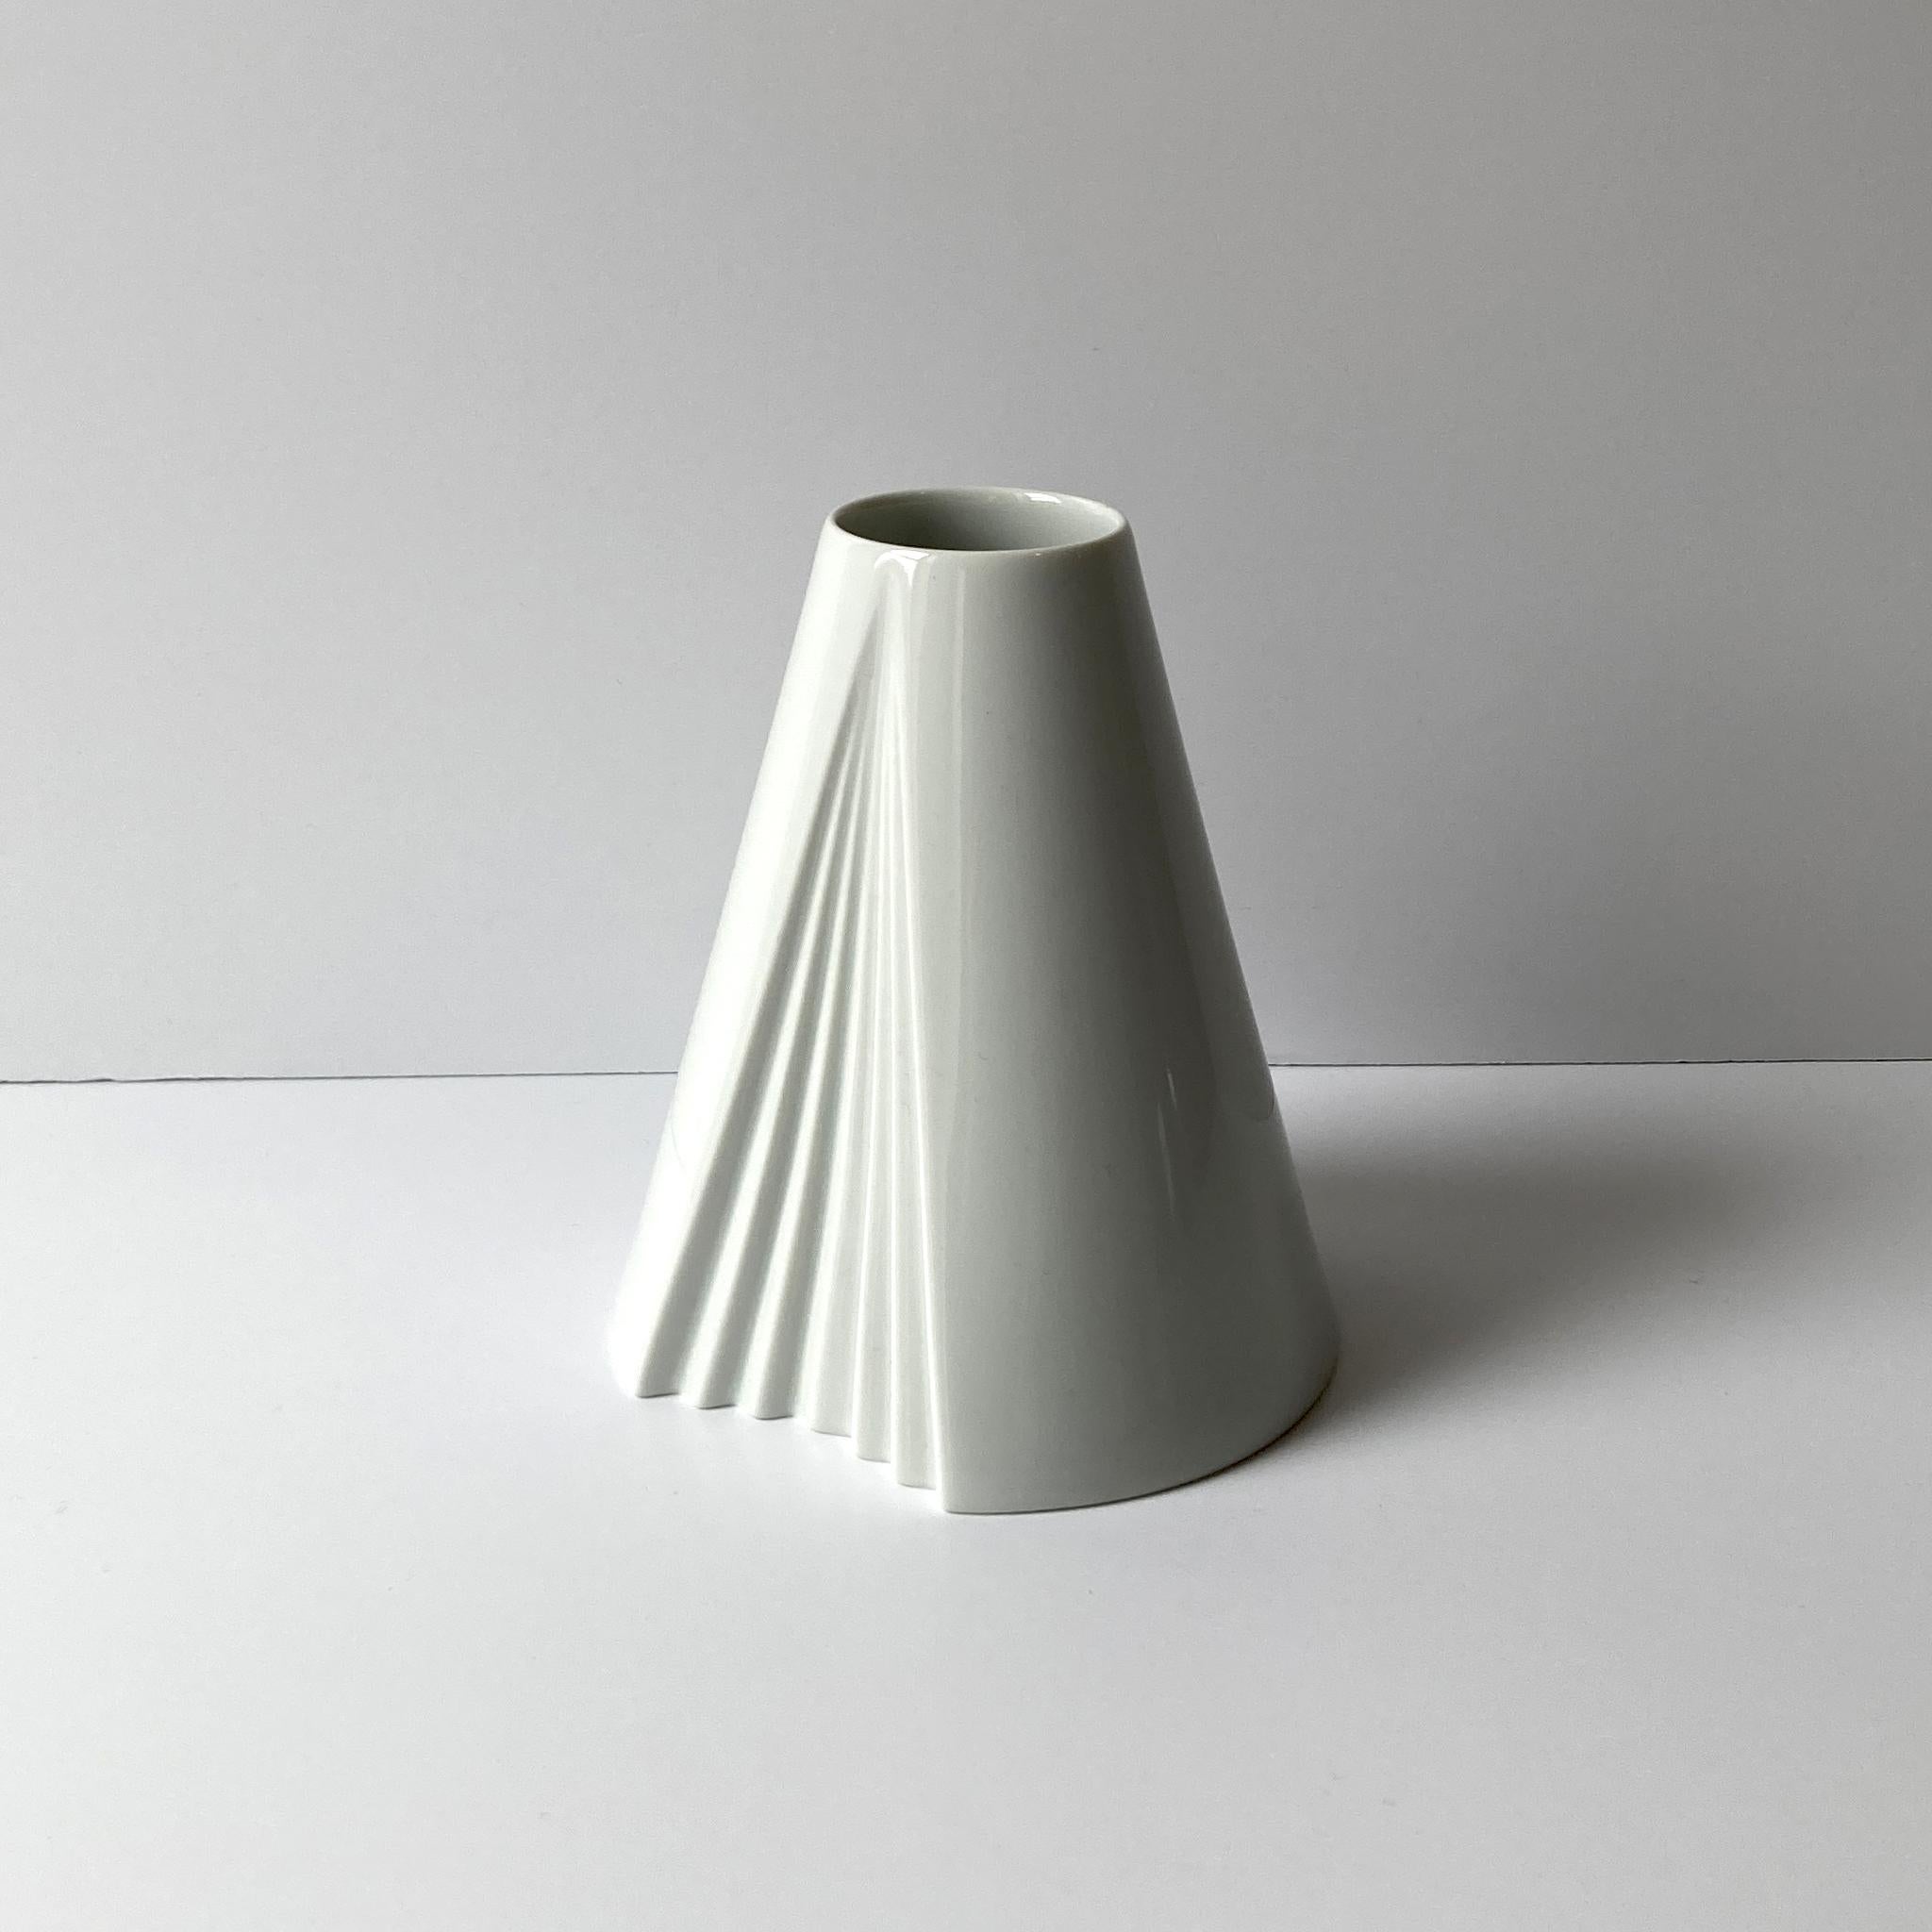 20th Century Rosenthal and Thomas Keramik White Porcelain Vases, Pair of Two For Sale